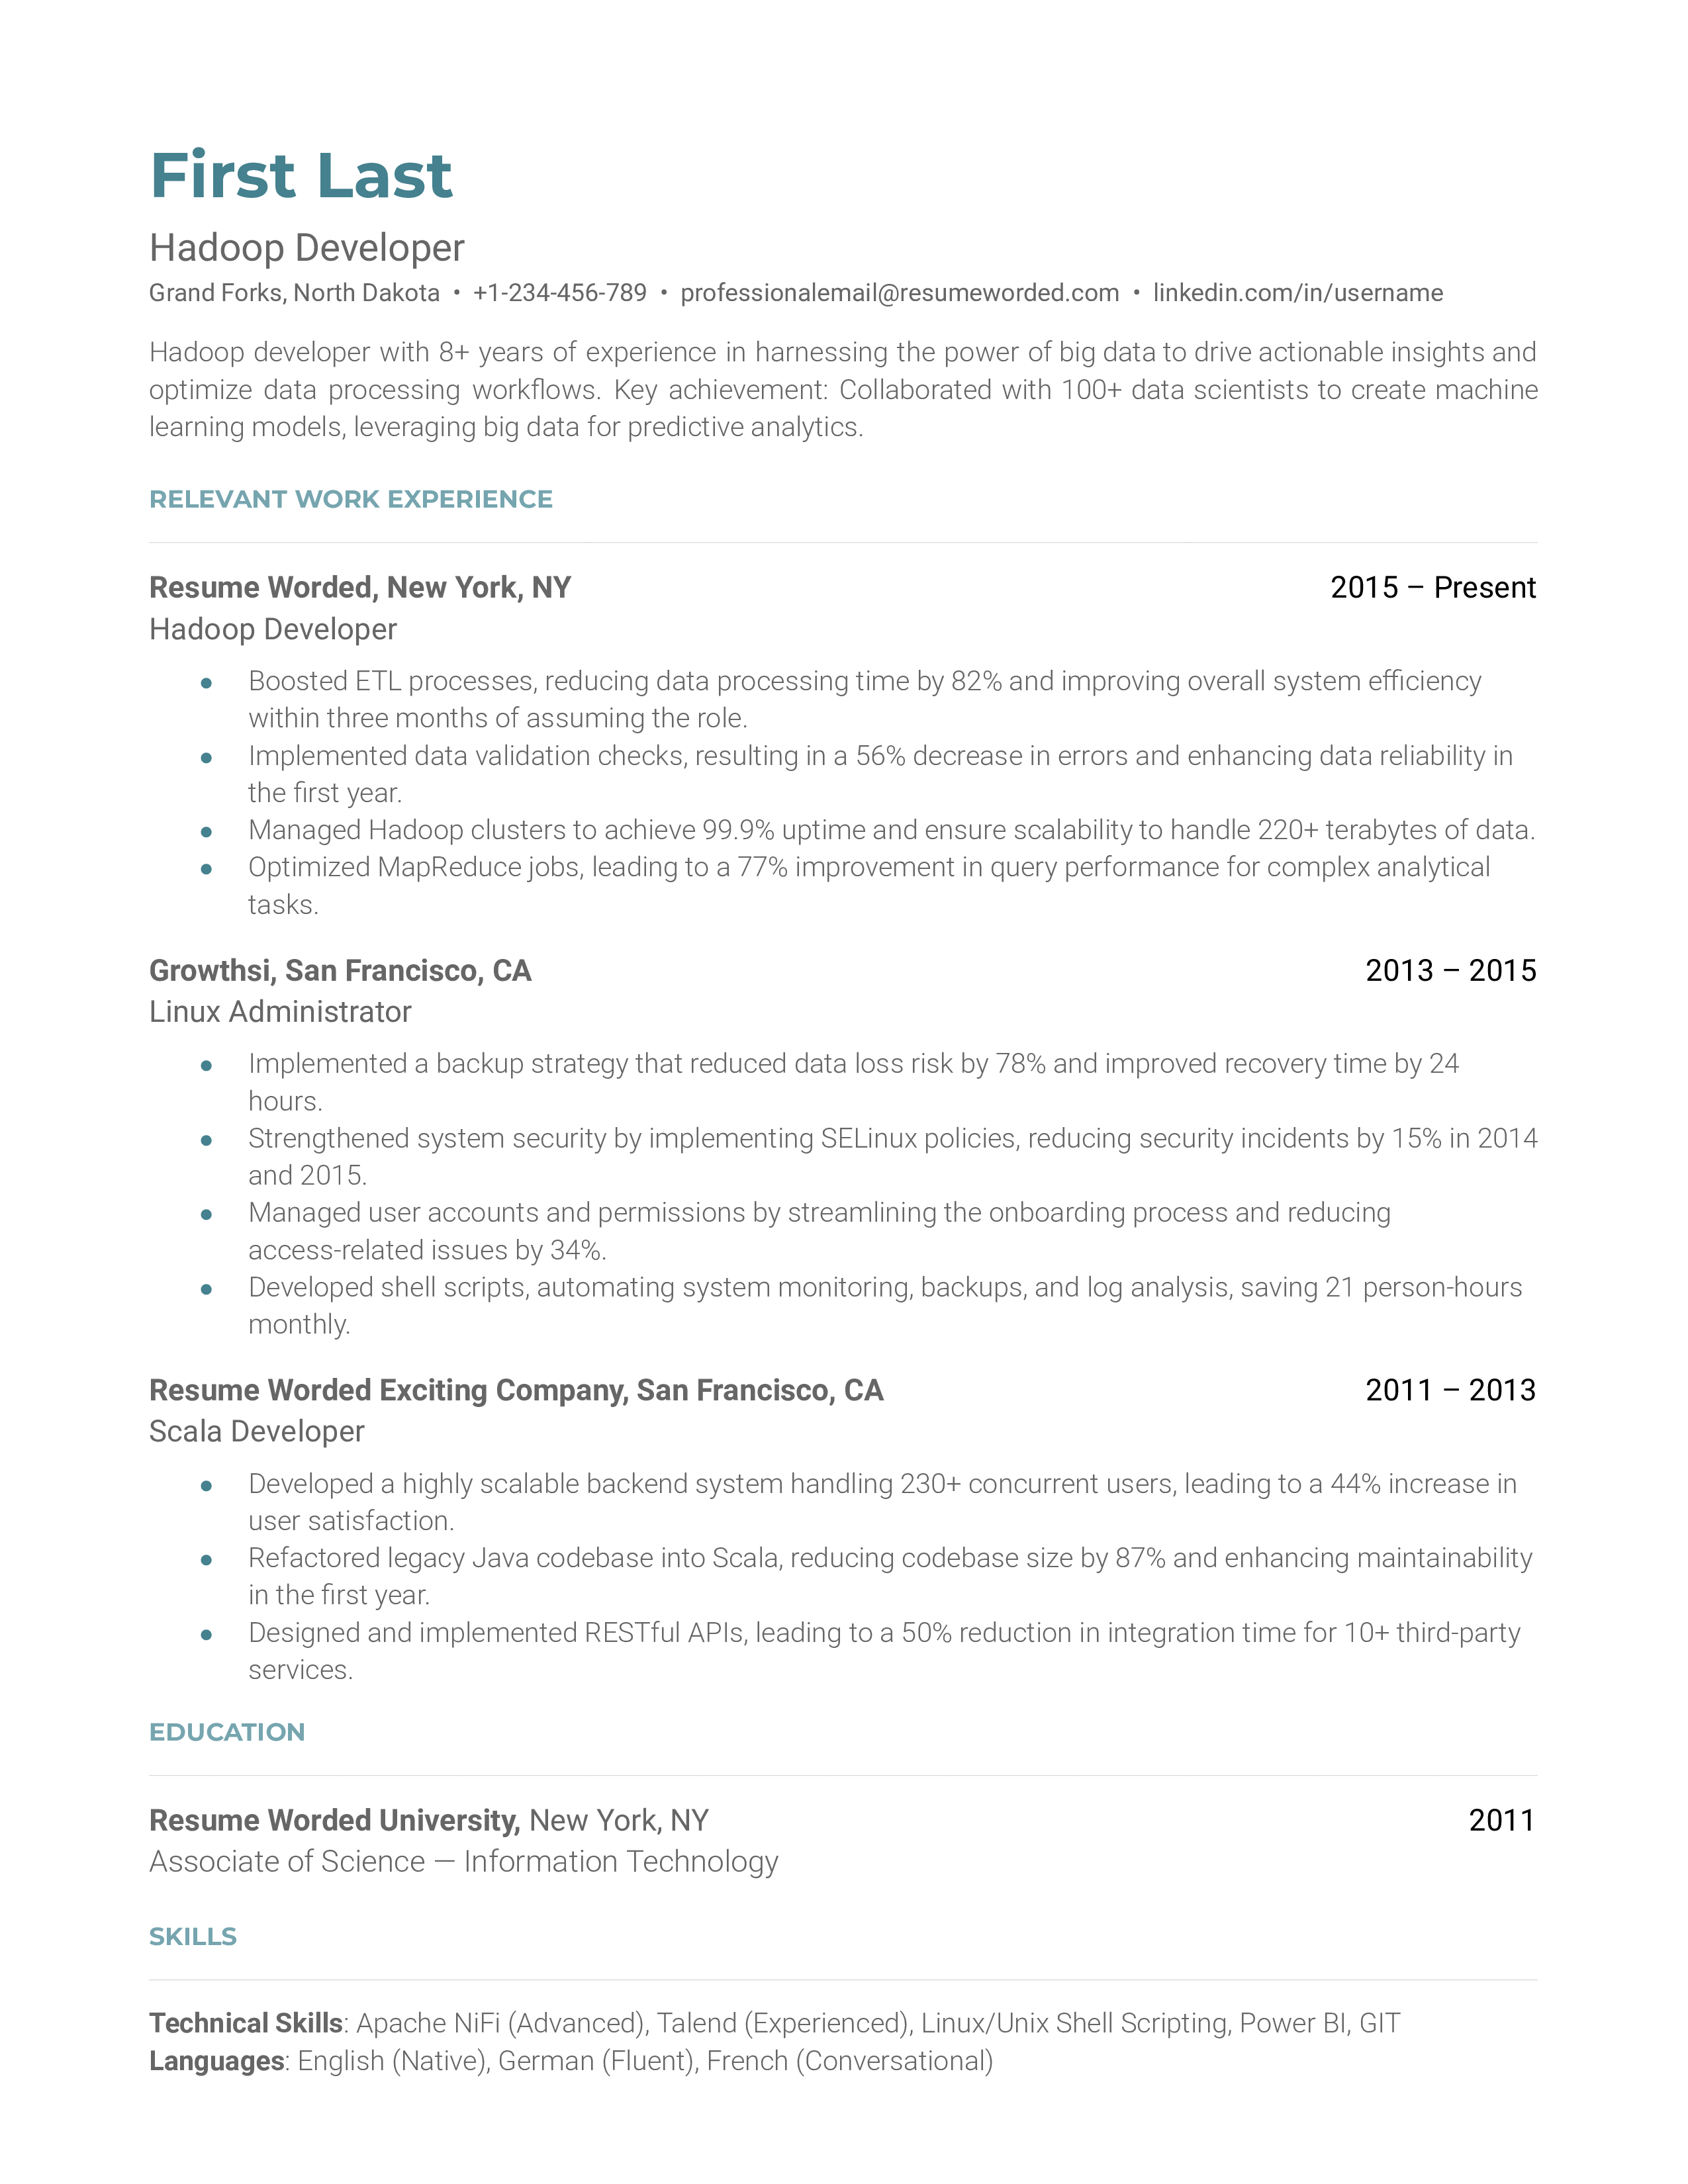 Hadoop Developer resume featuring specific project experiences and process improvements.